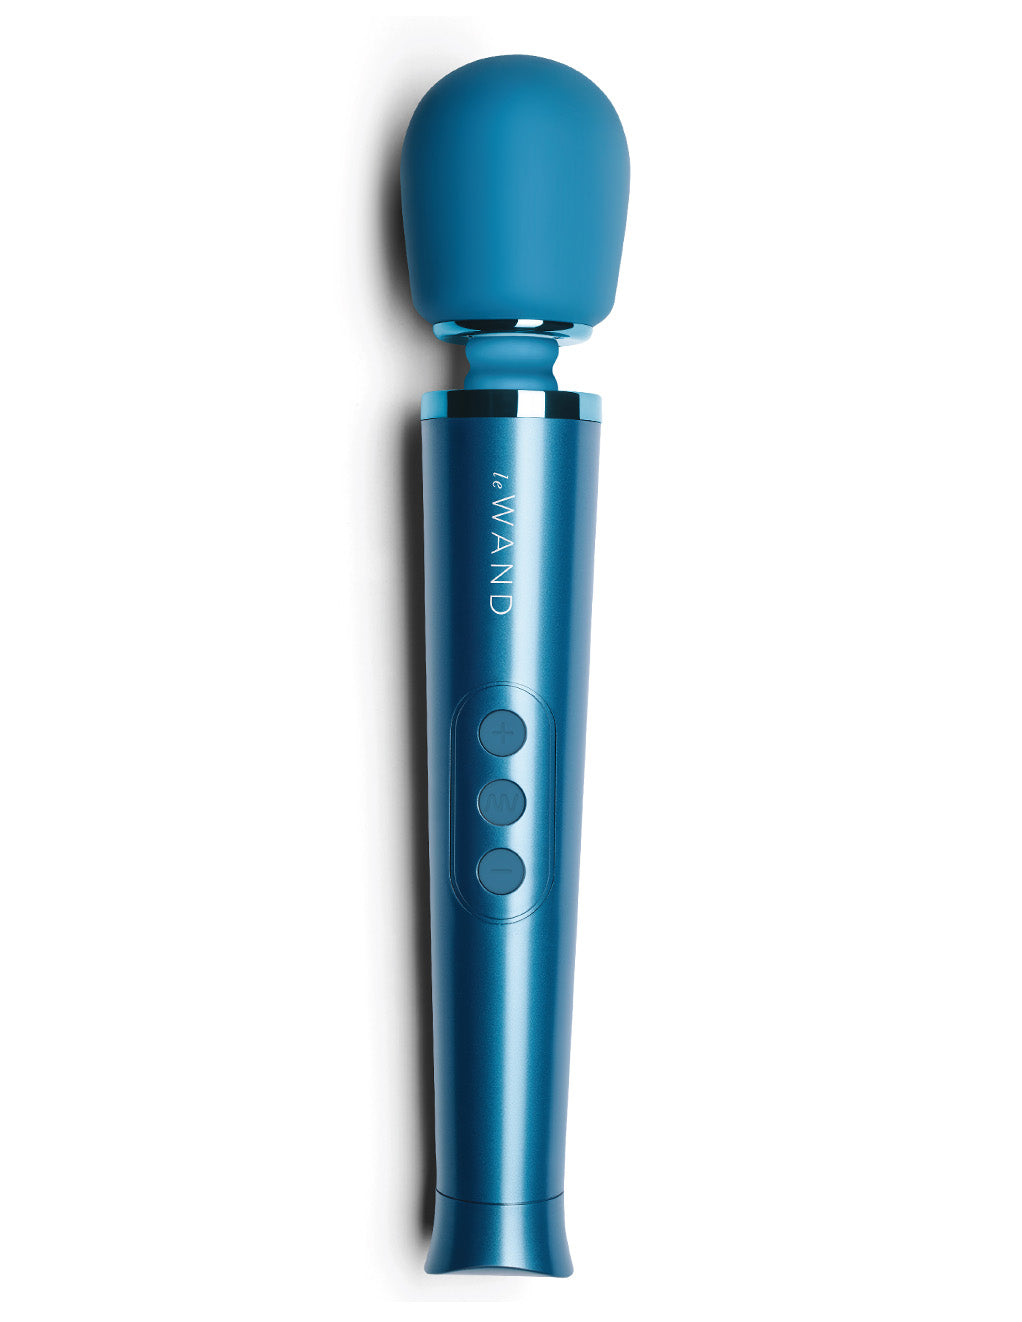 Le Wand Petite Rechargeable Wand Massager- Blue- Front